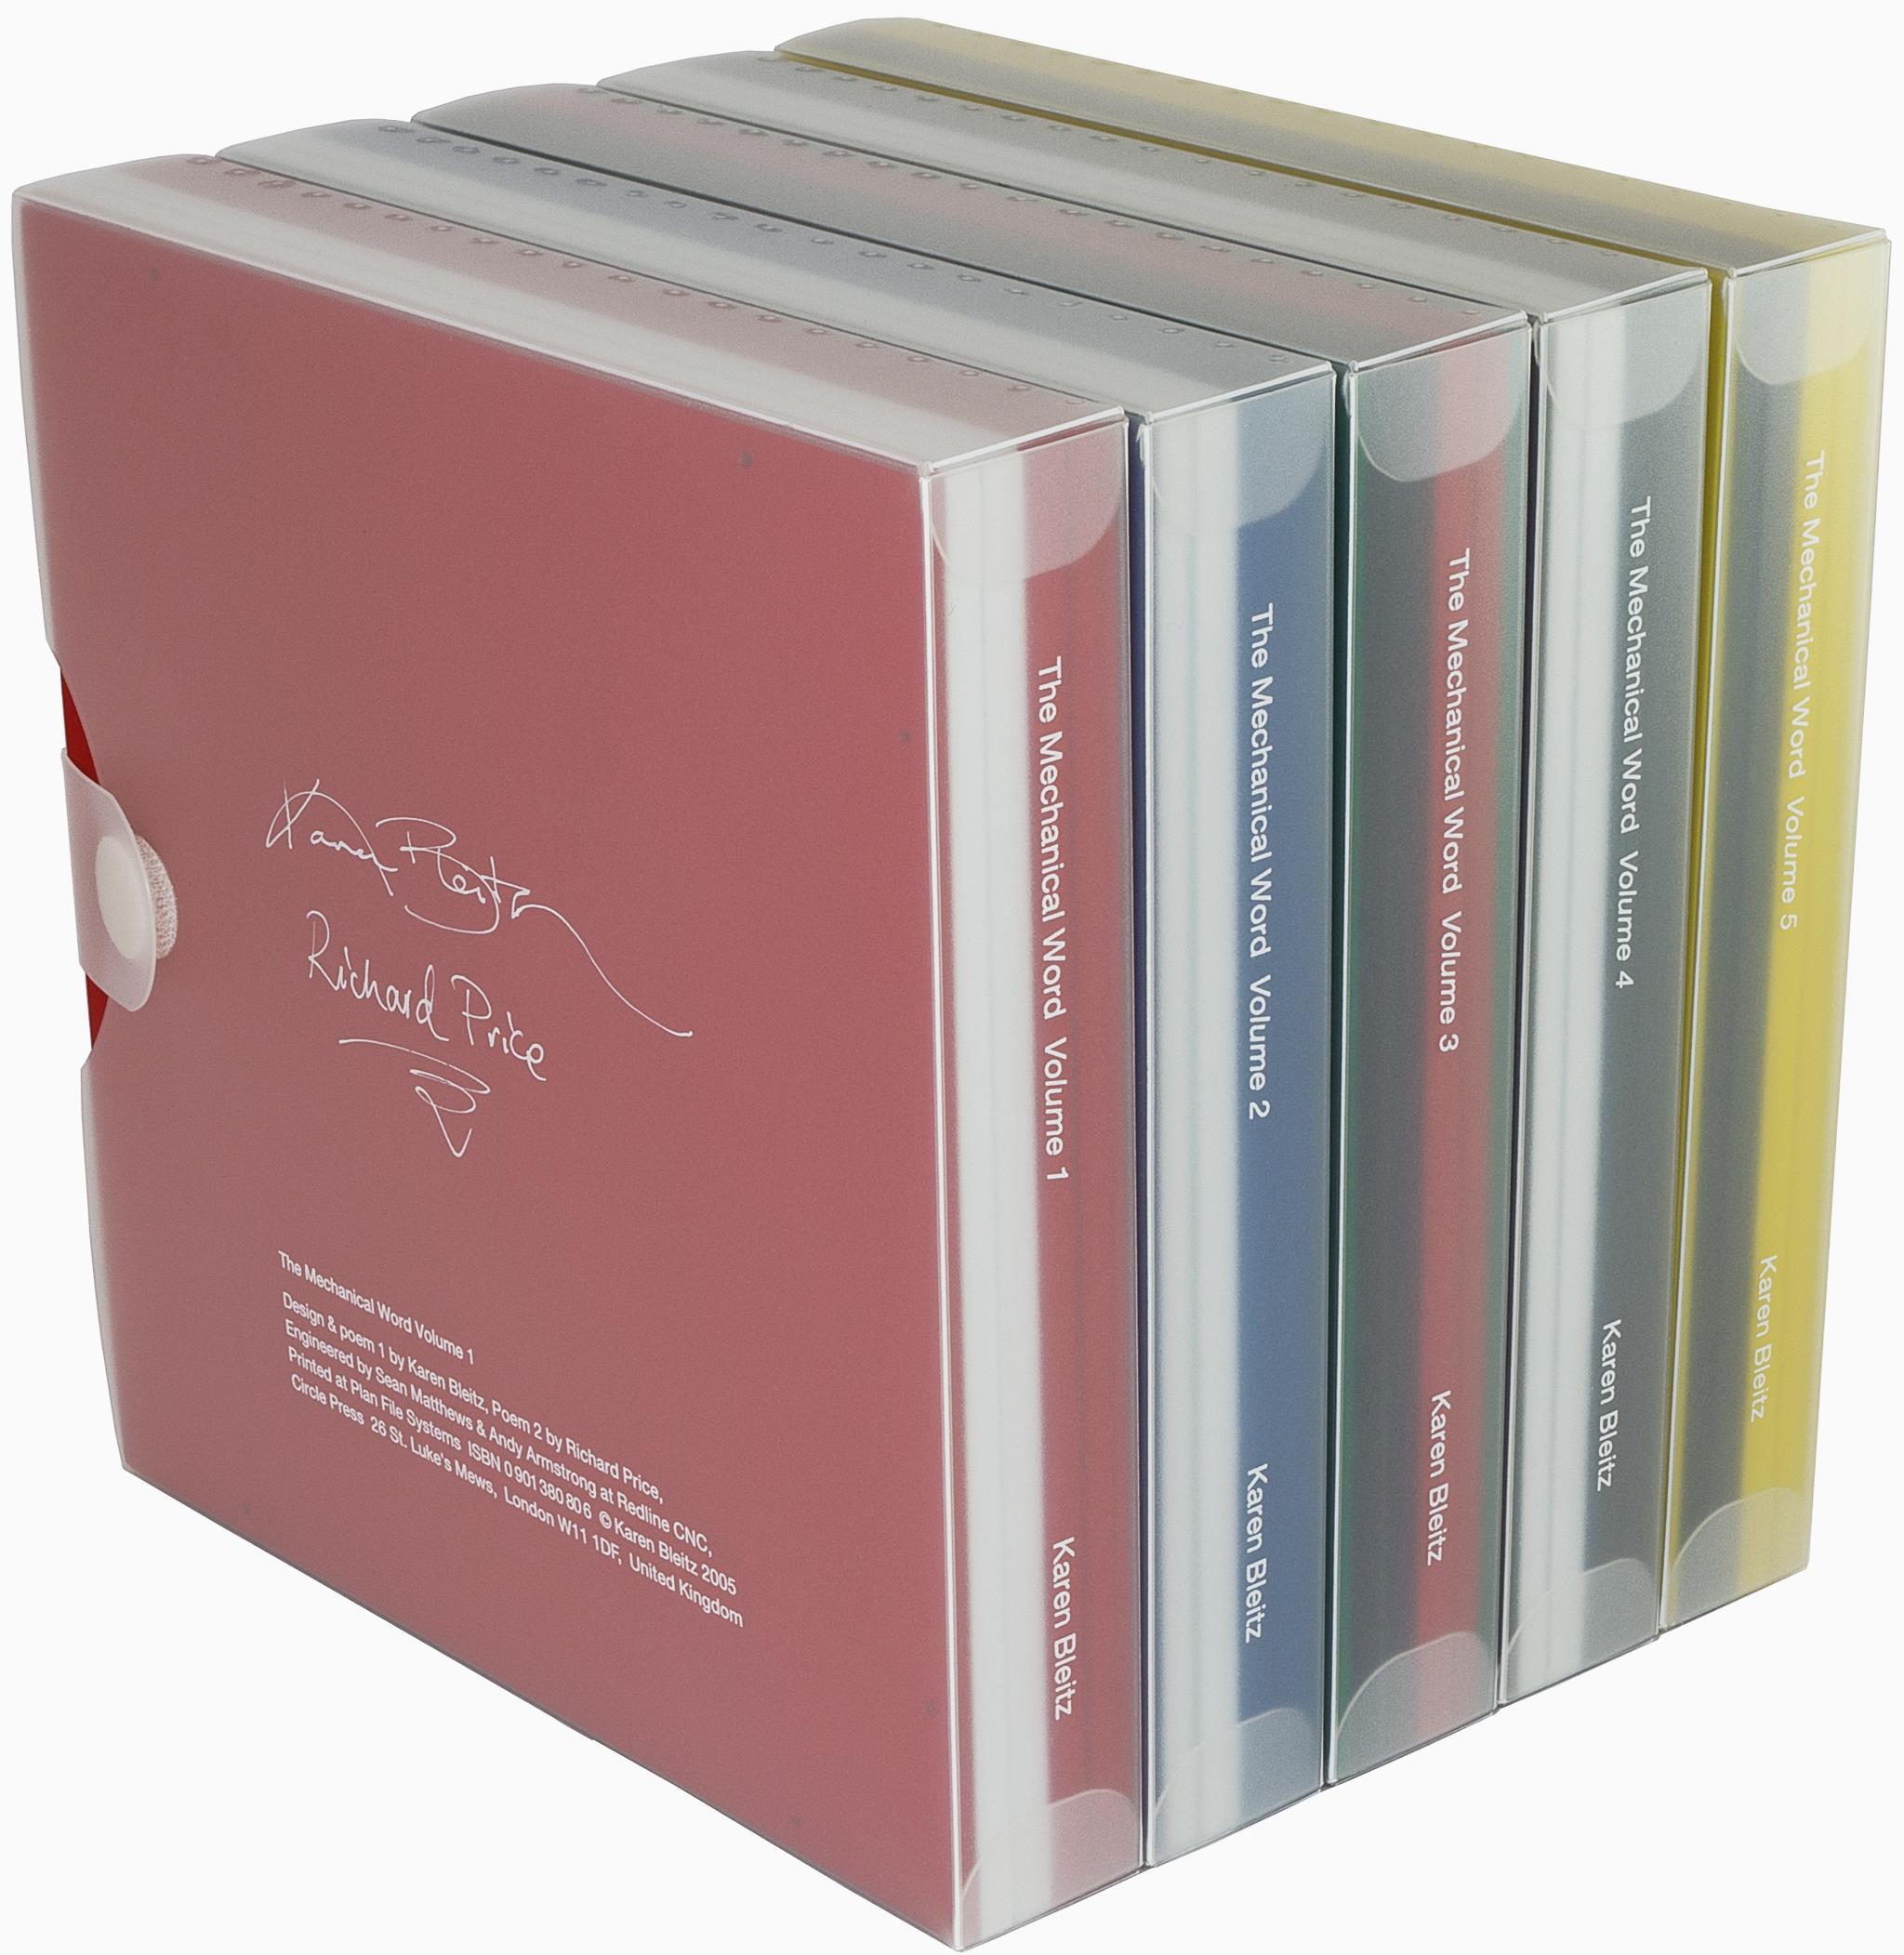 Artists book series titled The Mechanical Word Volumes 1 through 5 by Karen Bleitz encased in polypropylene boxes.